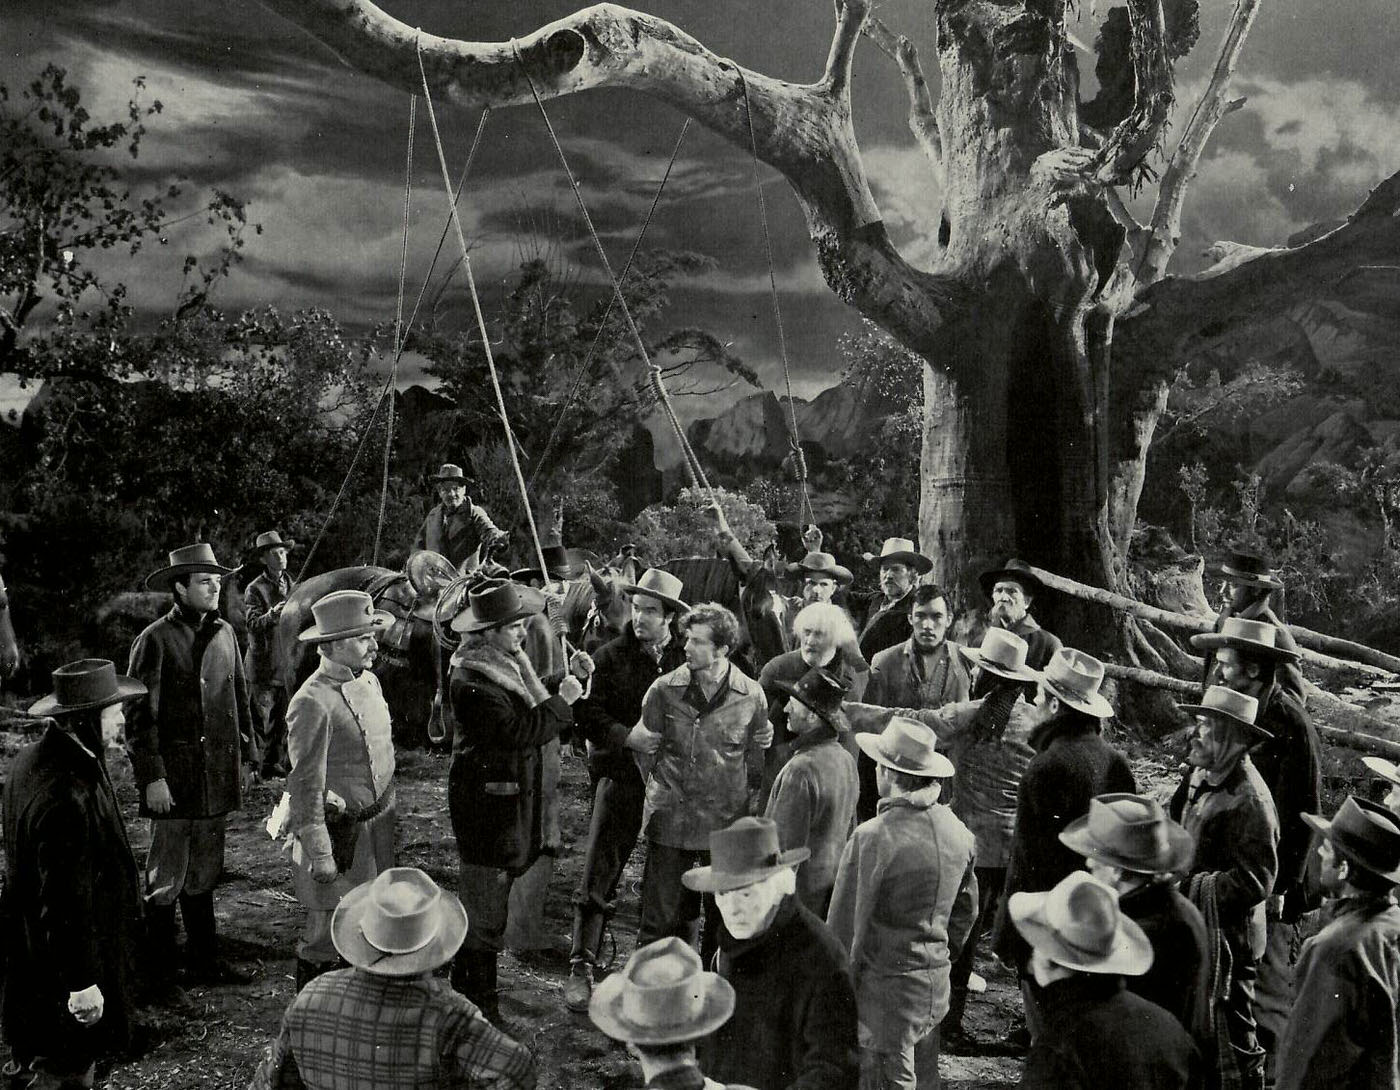 Anthony Quinn, Dana Andrews, Harry Davenport, Matt Briggs, Frank Conroy, William Eythe, Francis Ford, Paul Hurst, and Marc Lawrence in The Ox-Bow Incident (1942)